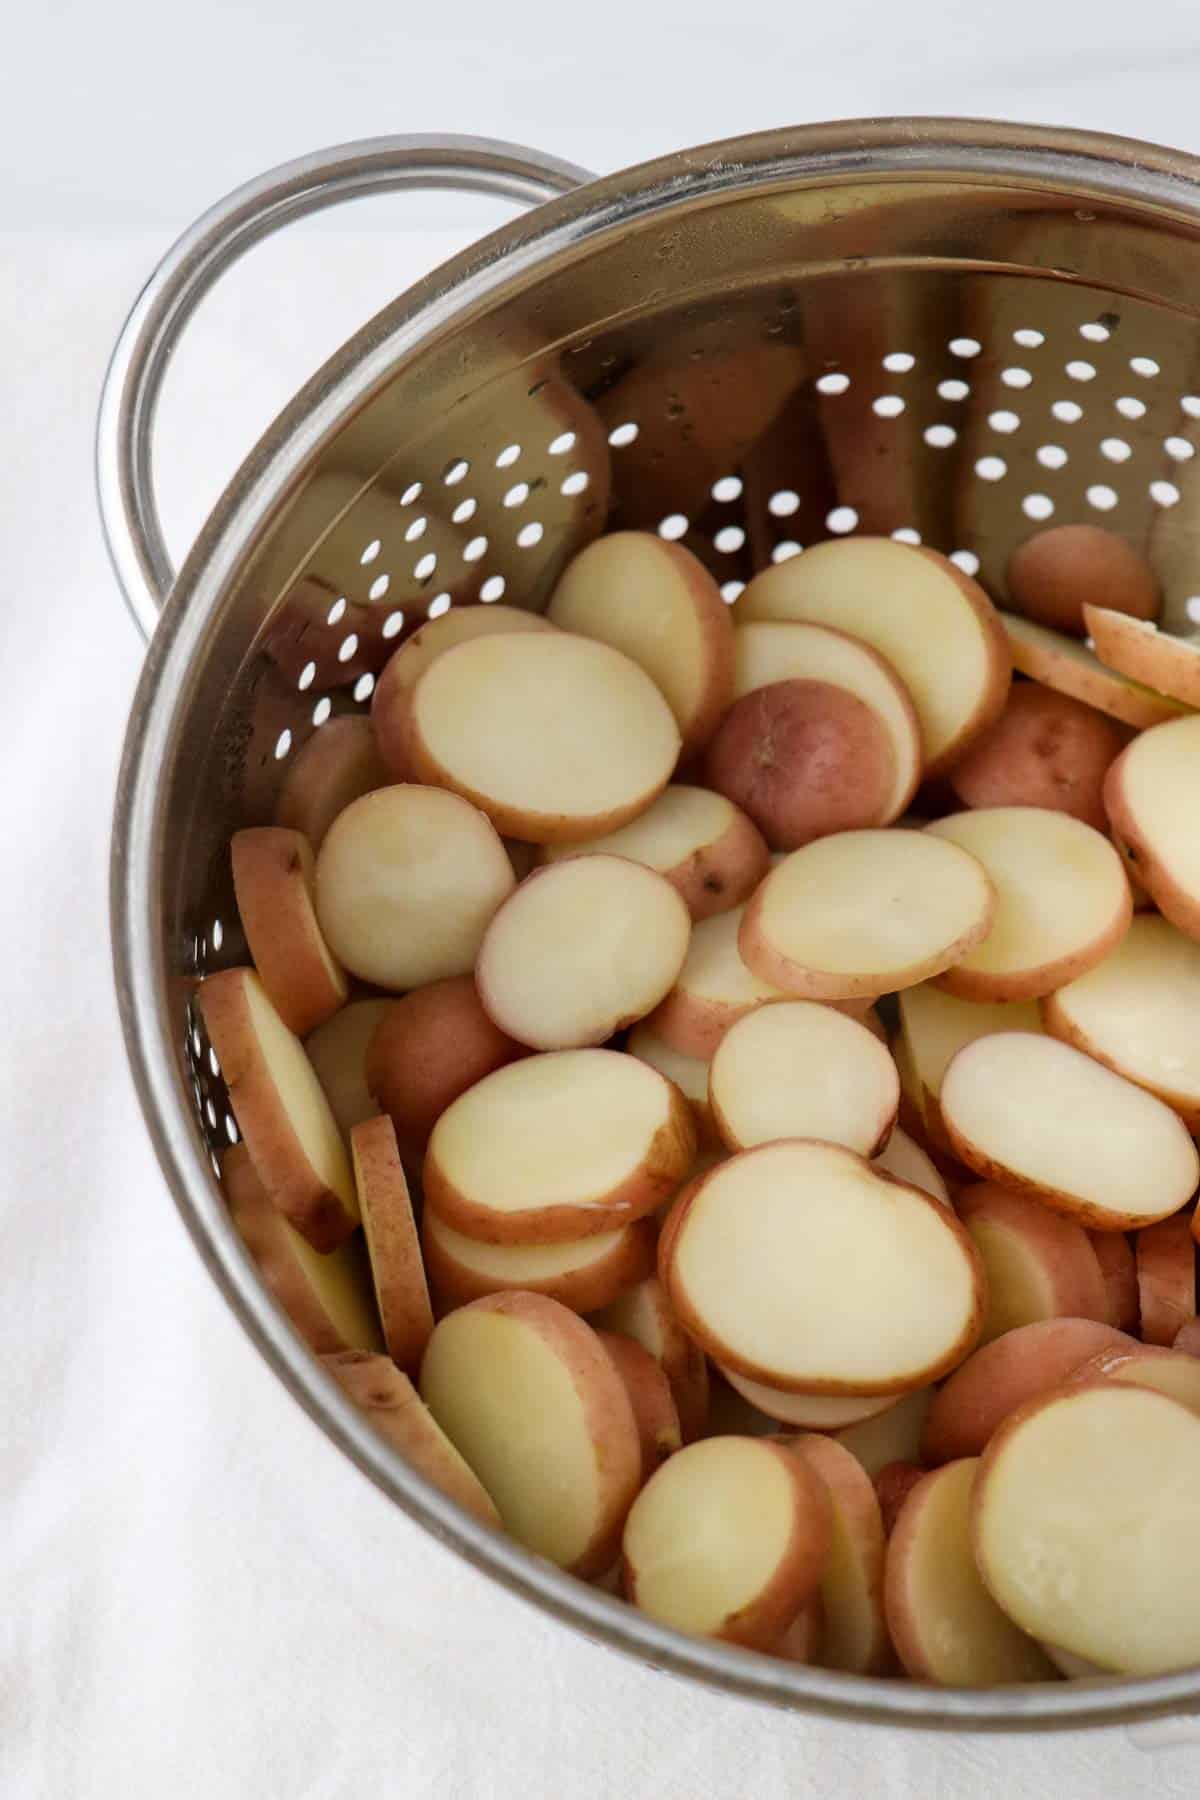 Sliced baby red potatoes in a metal colander.